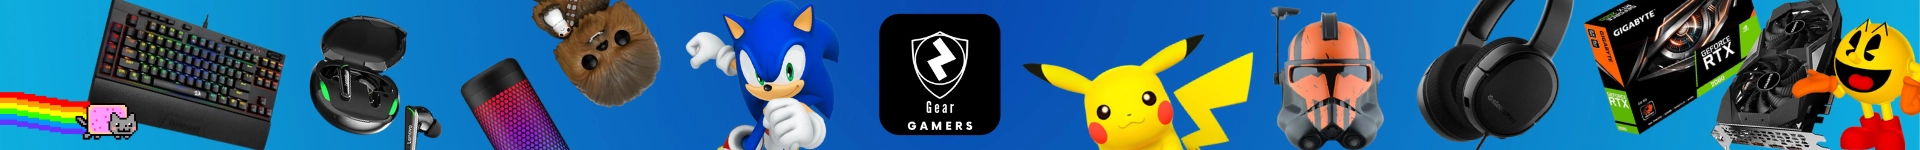 Geargamers / Geargamings achtergrond